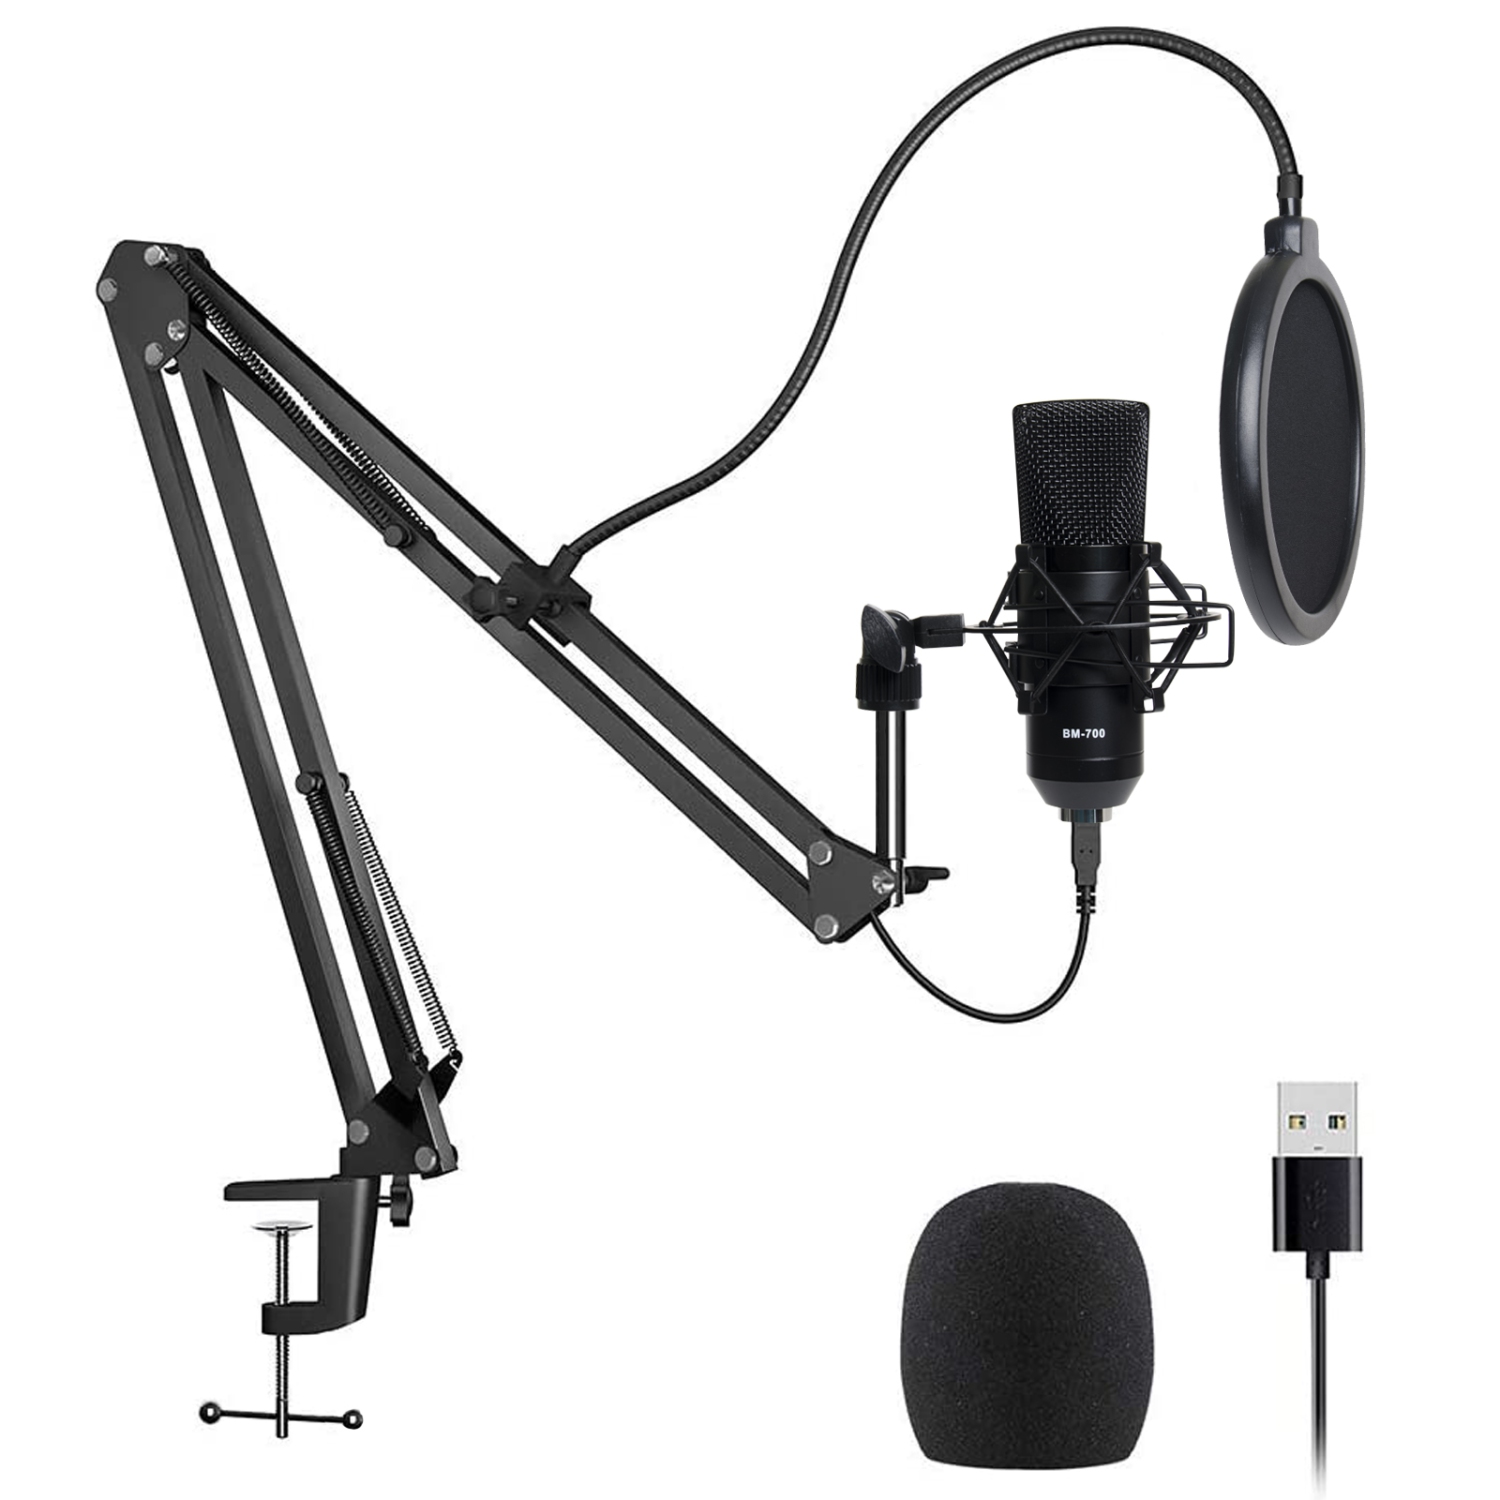 Mic Bundle with Adjustment Arm Stand Low Noise Microphone with Mute key for YouTube Recording Streaming Professional USB Microphone Kit Podcast Condenser Mic for Mac/PC/Smartphone Gaming 